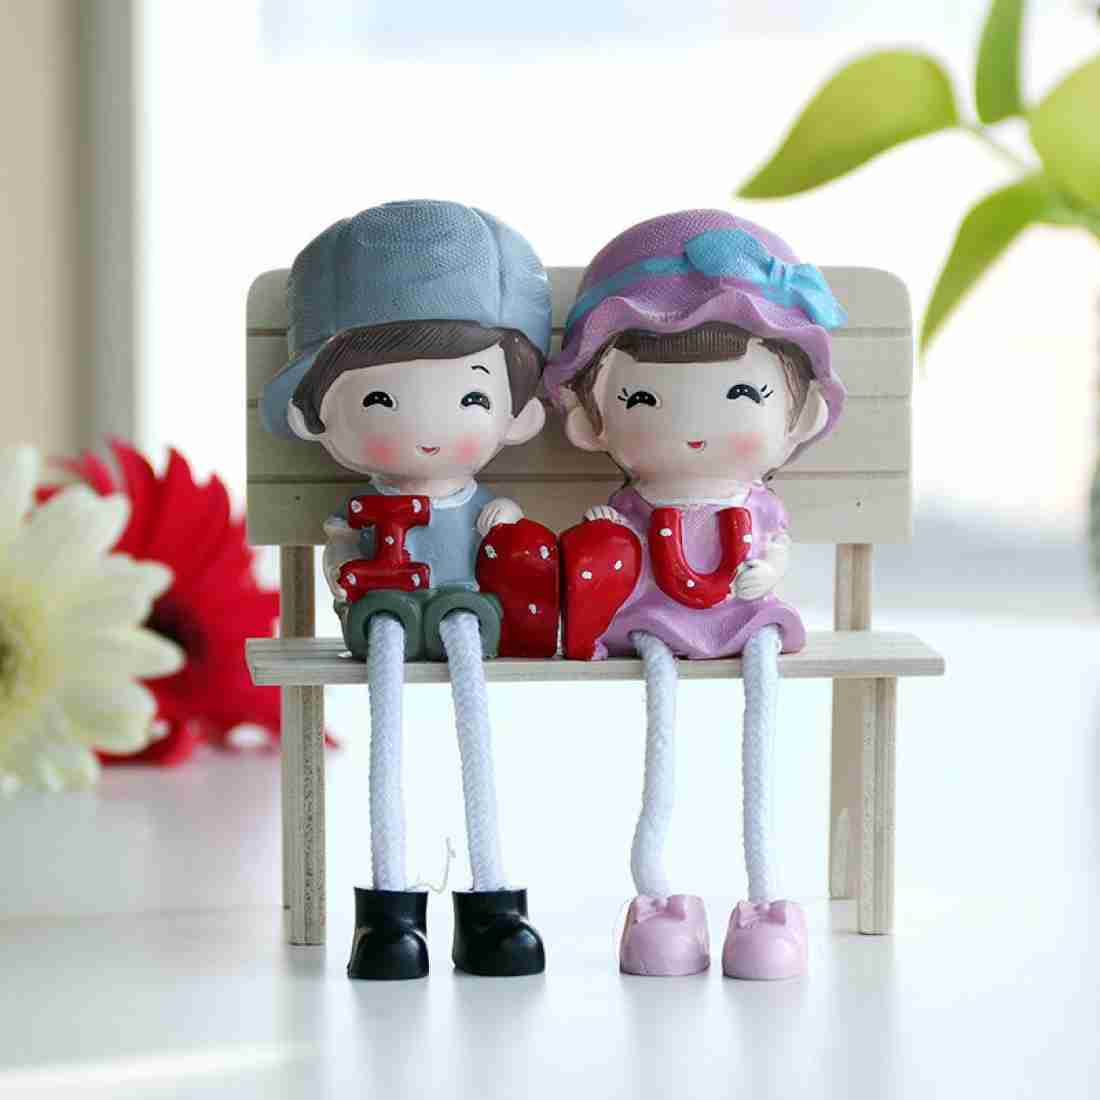 Elegant Lifestyle Cute Couple Holding Hands with Decorative Light